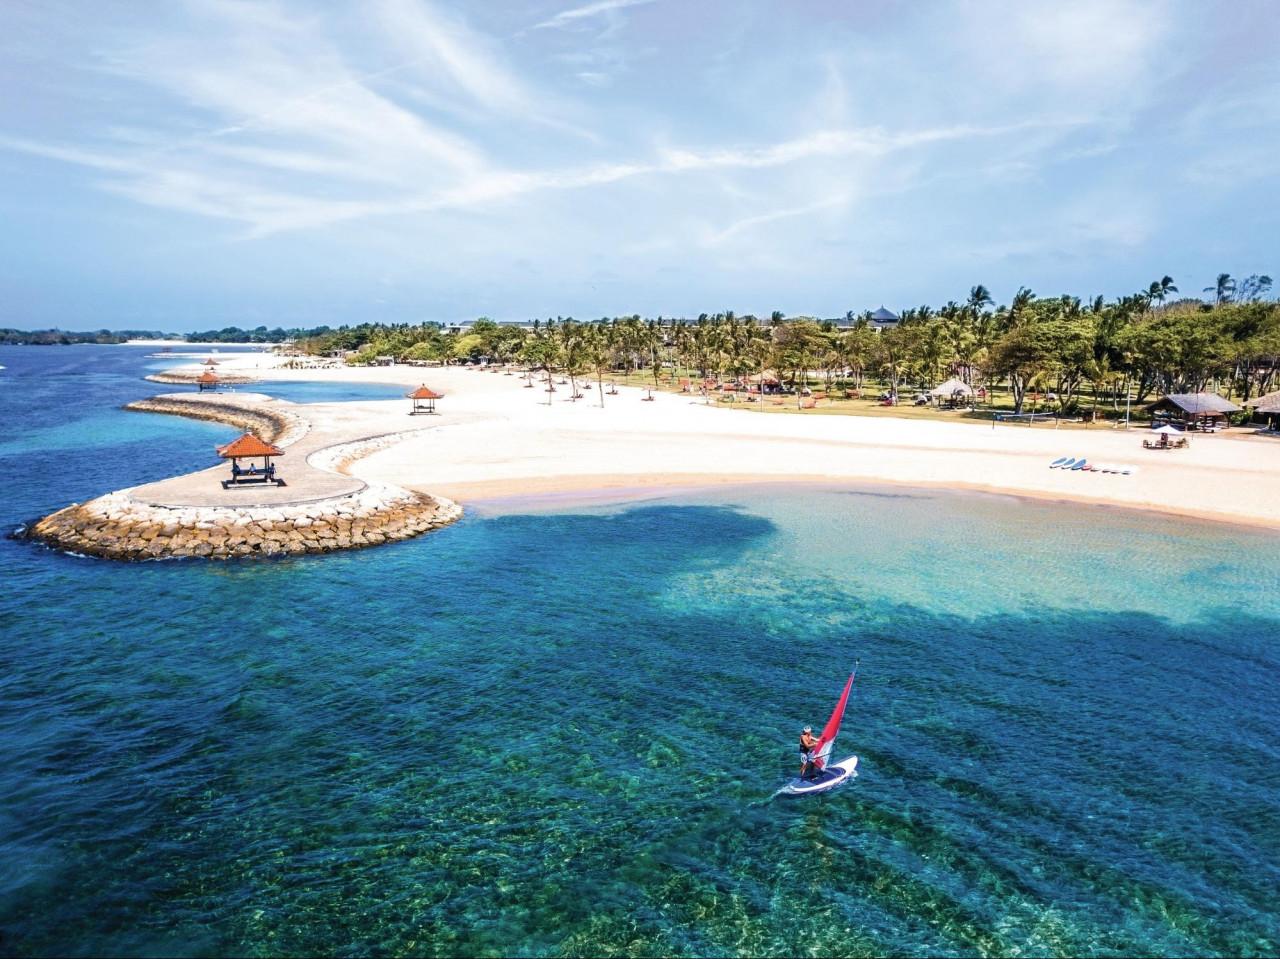 The Island Exchange - win a trip to Club Med Bali